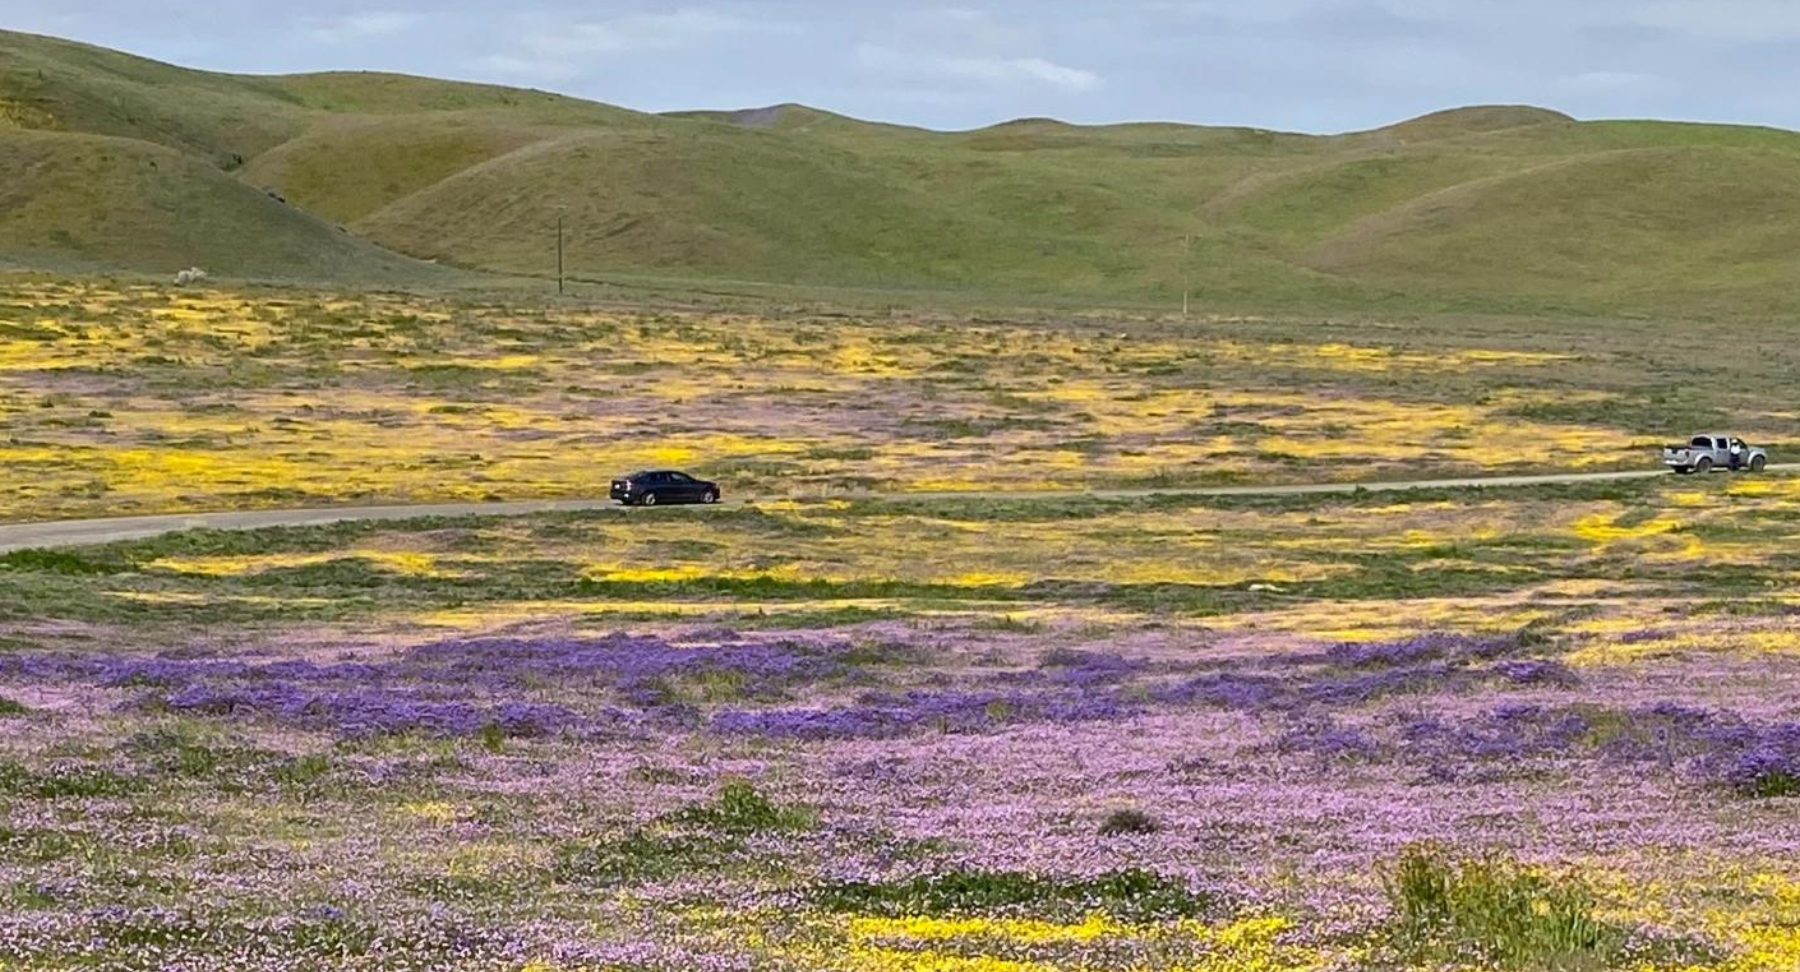 Image of multiple hills over flatland, with the flatland being covered in yellow and purple flowers. A road also goes through the flatland, with two cars riding on it.